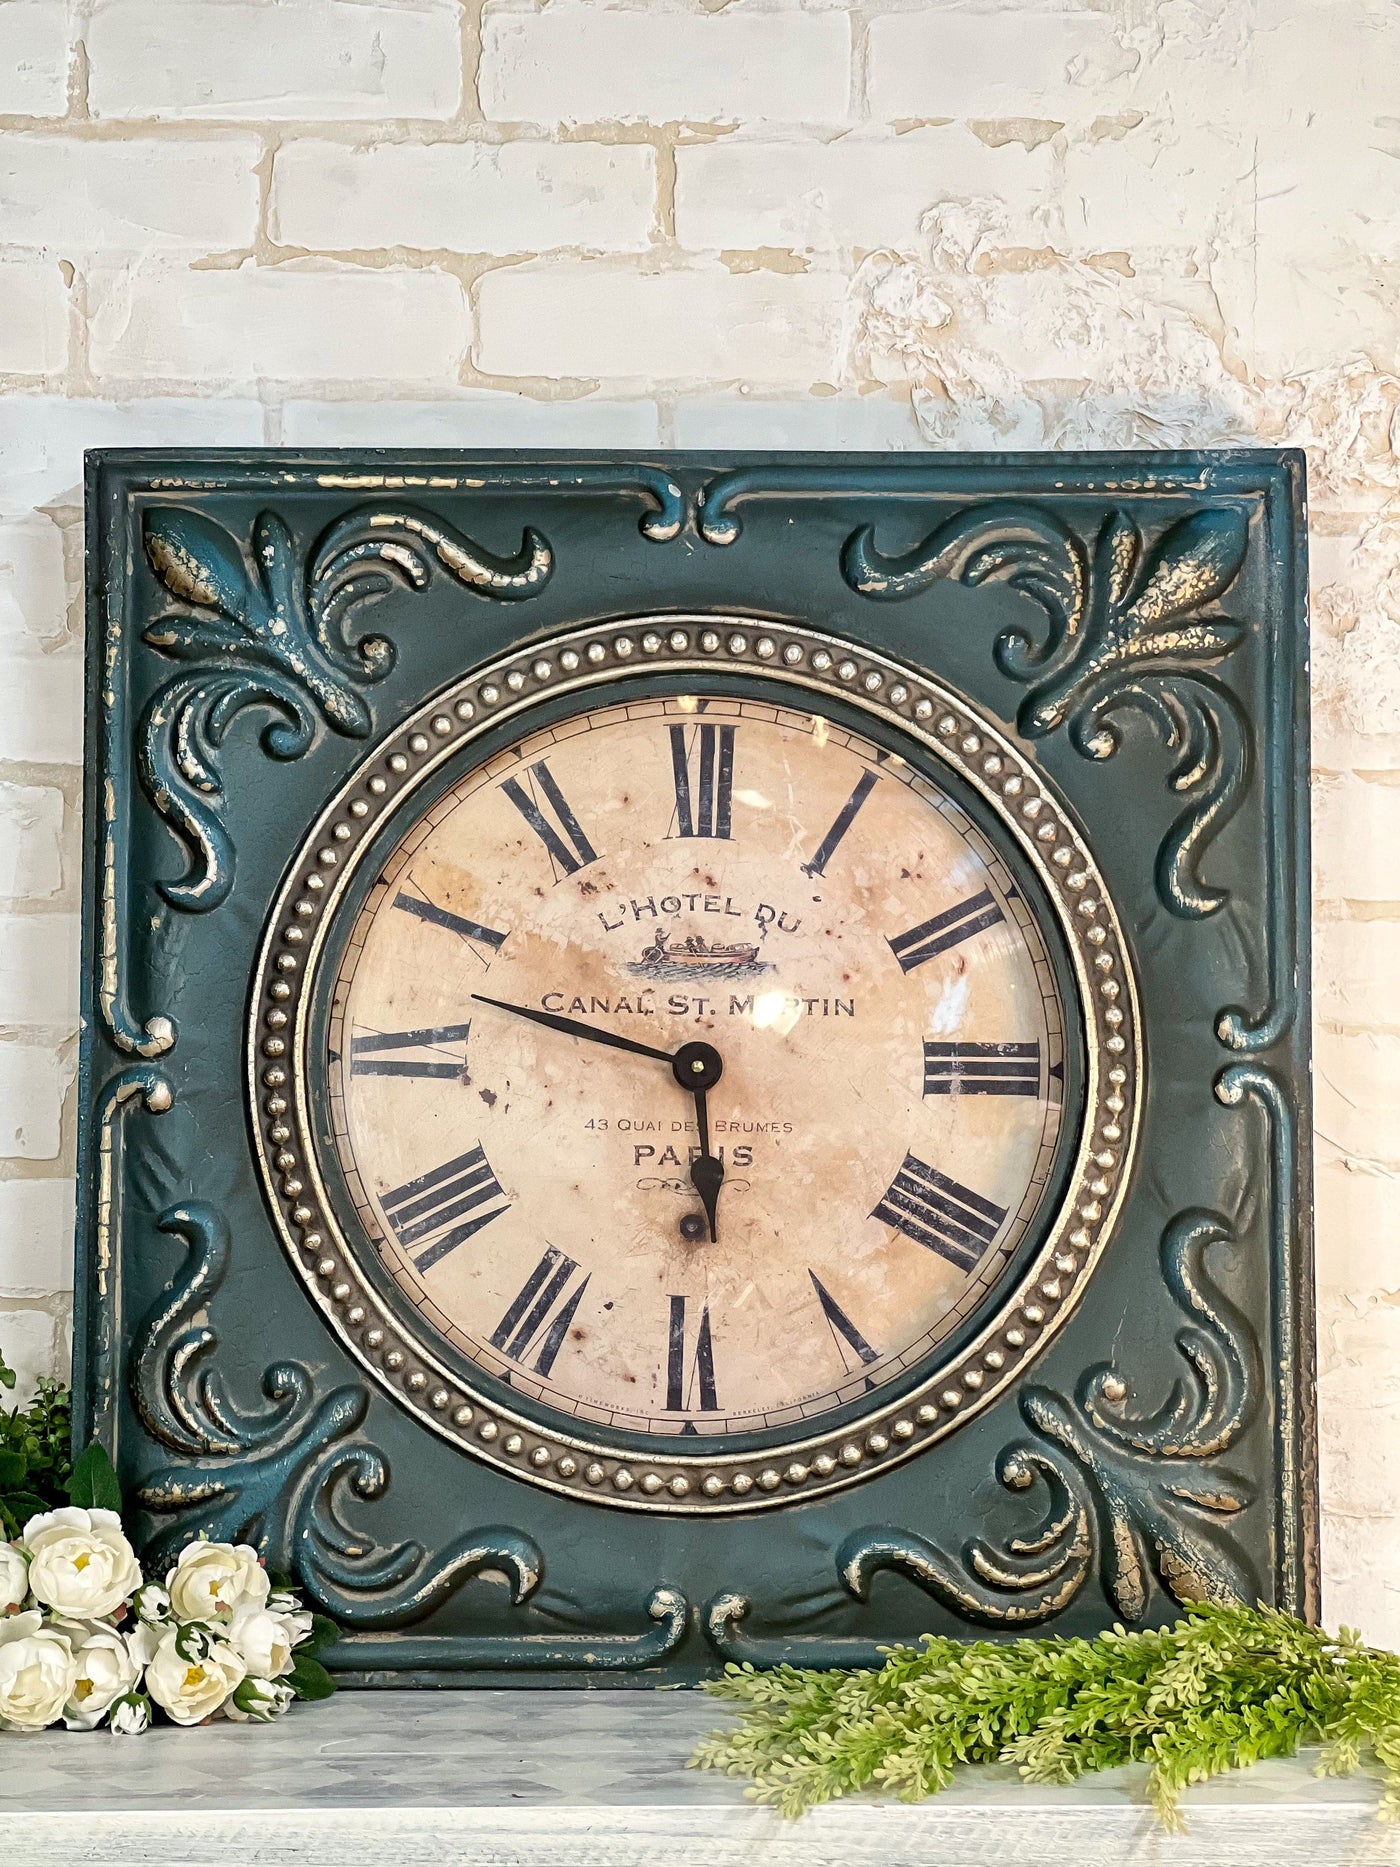 TEAL DISTRESSED ORNATE METAL WALL CLOCK BY UTTERMOST Revive In Style Vintage Furniture Painted Refinished Redesign Beautiful One of a Kind Artistic Antique Unique Home Decor Interior Design French Country Shabby Chic Cottage Farmhouse Grandmillenial Coastal Chalk Paint Metallic Glam Eclectic Quality Dovetailed Rustic Furniture Painter Pinterest Bedroom Living Room Entryway Kitchen Home Trends House Styles Decorating ideas